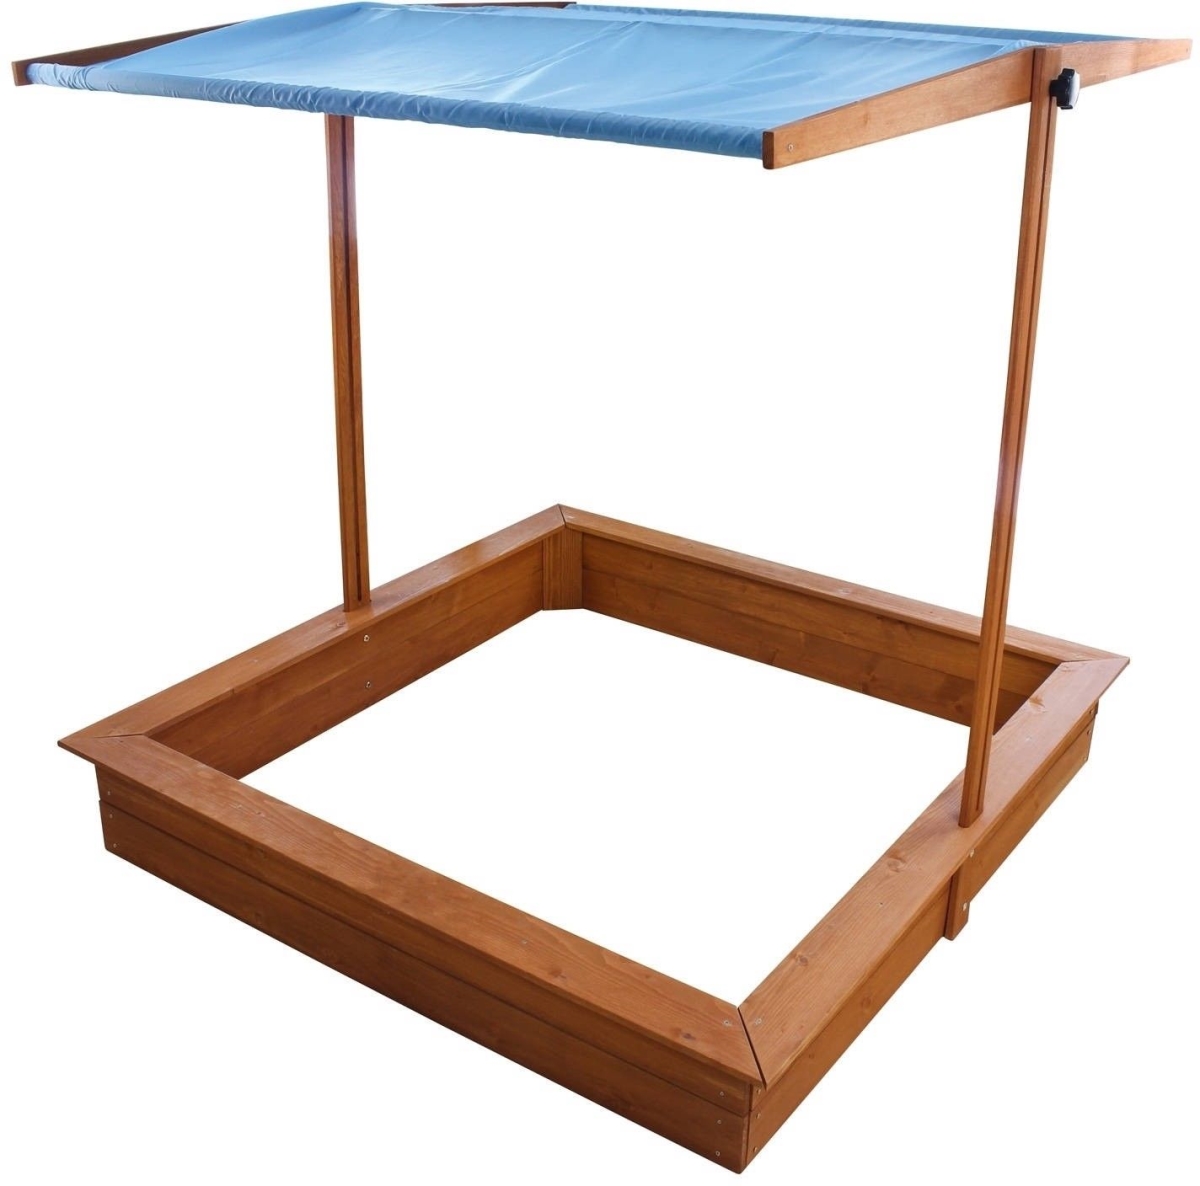 Picture of Homeware 2169 Red Hemlock Sand Box with Canopy